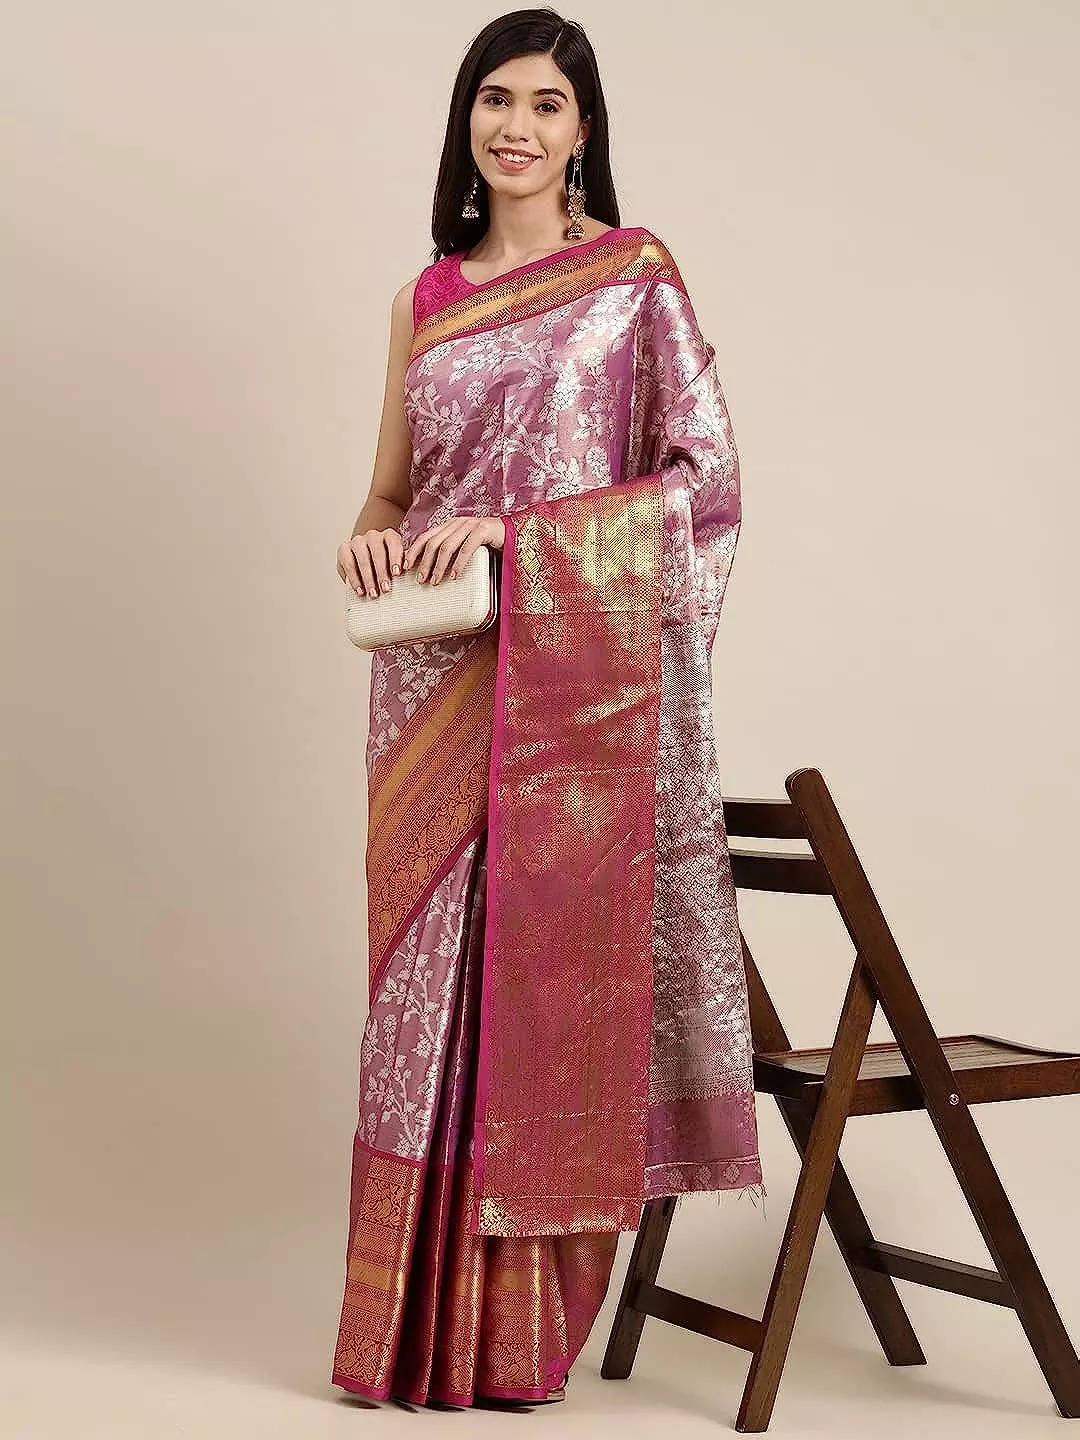 Silk Kanchi Pattu Sarees, Style : Fashionable, Feature : Anti-Wrinkle, Dry  Cleaning, Elegant Design at Best Price in Anantapur